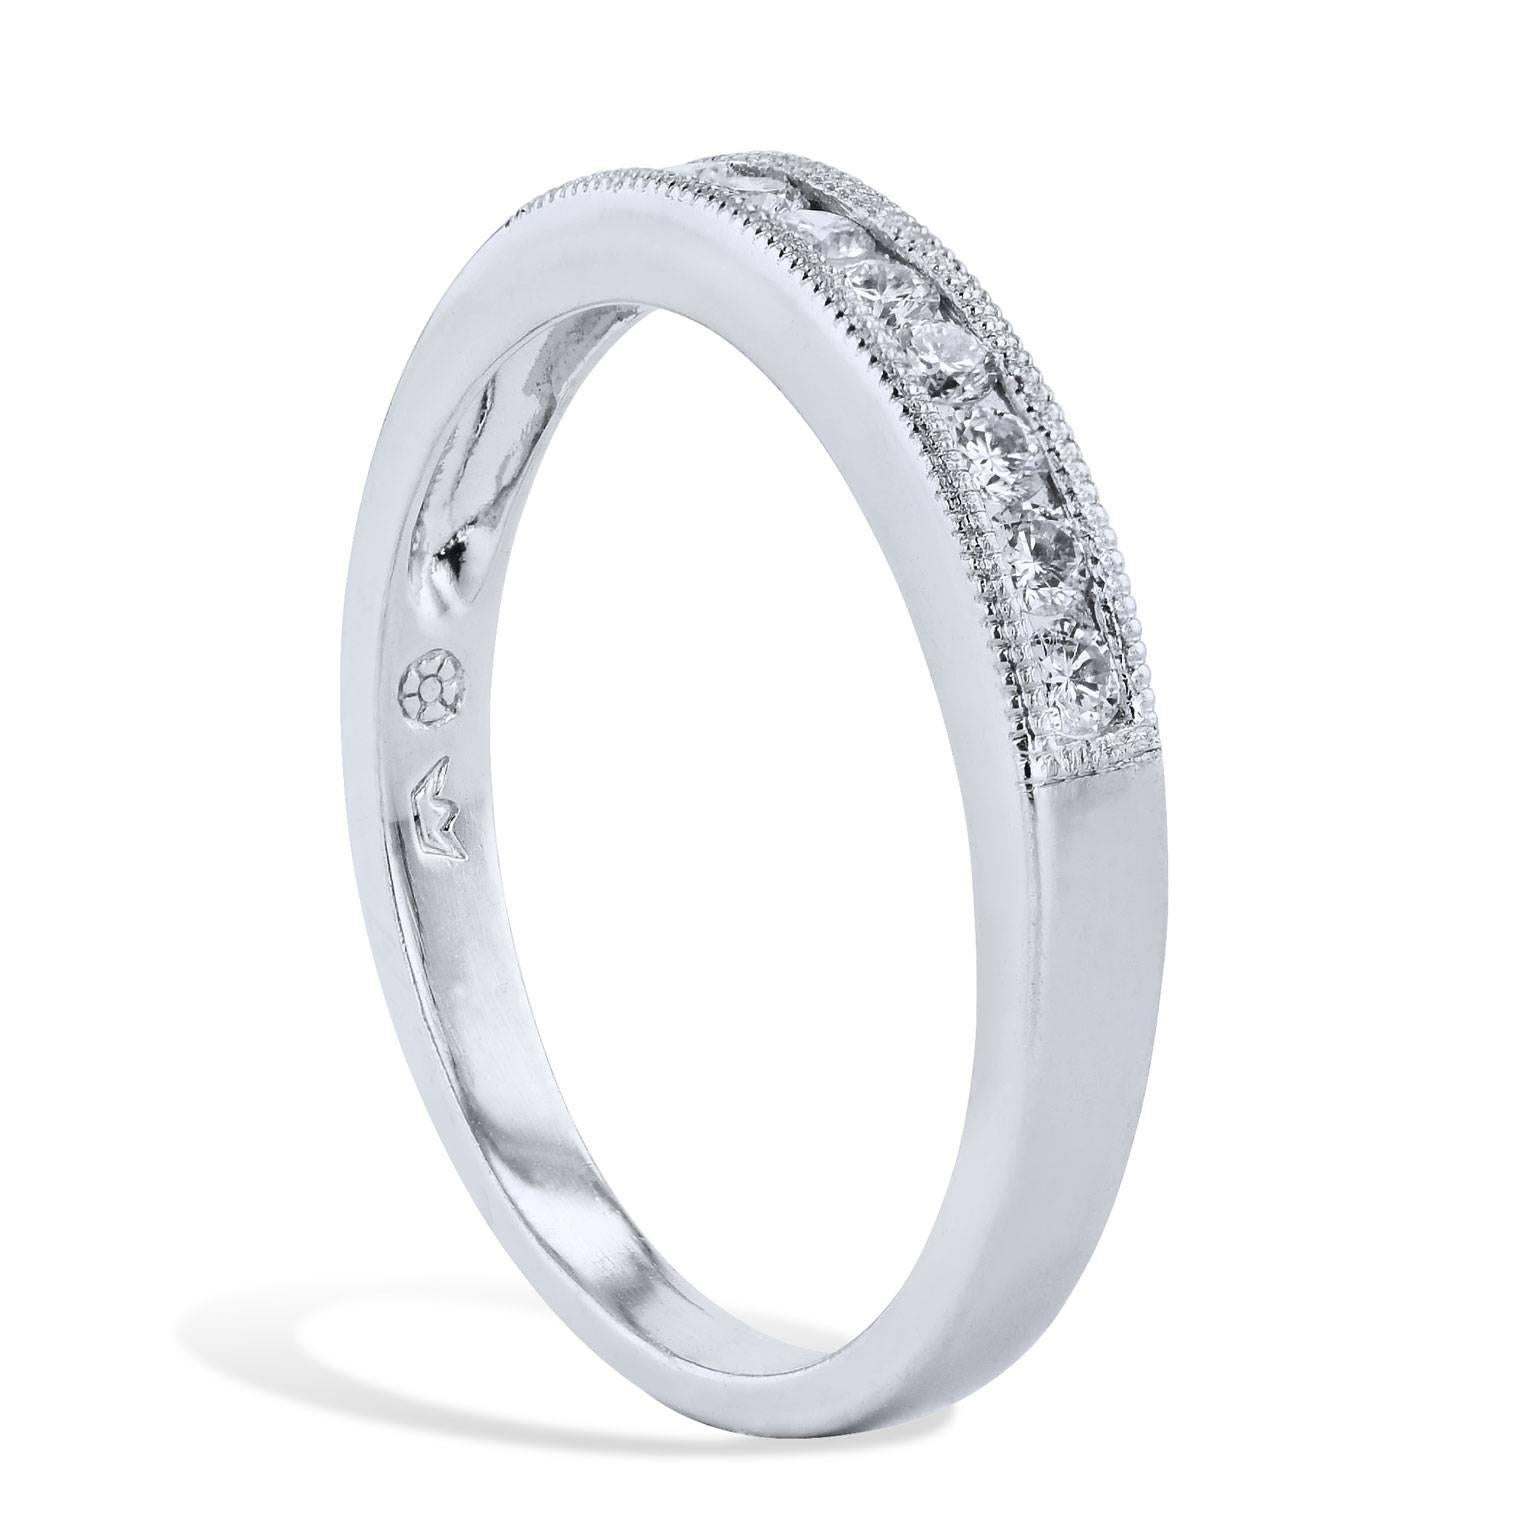 Estate 0.30 Carat Channel Set Diamond Band Platinum Ring

Enjoy this previously loved platinum diamond band ring featuring nine diamonds with milgrain work, 
channel-set with a total weight of 0.30 carat (F/G /SI1).  

This estate ring is in